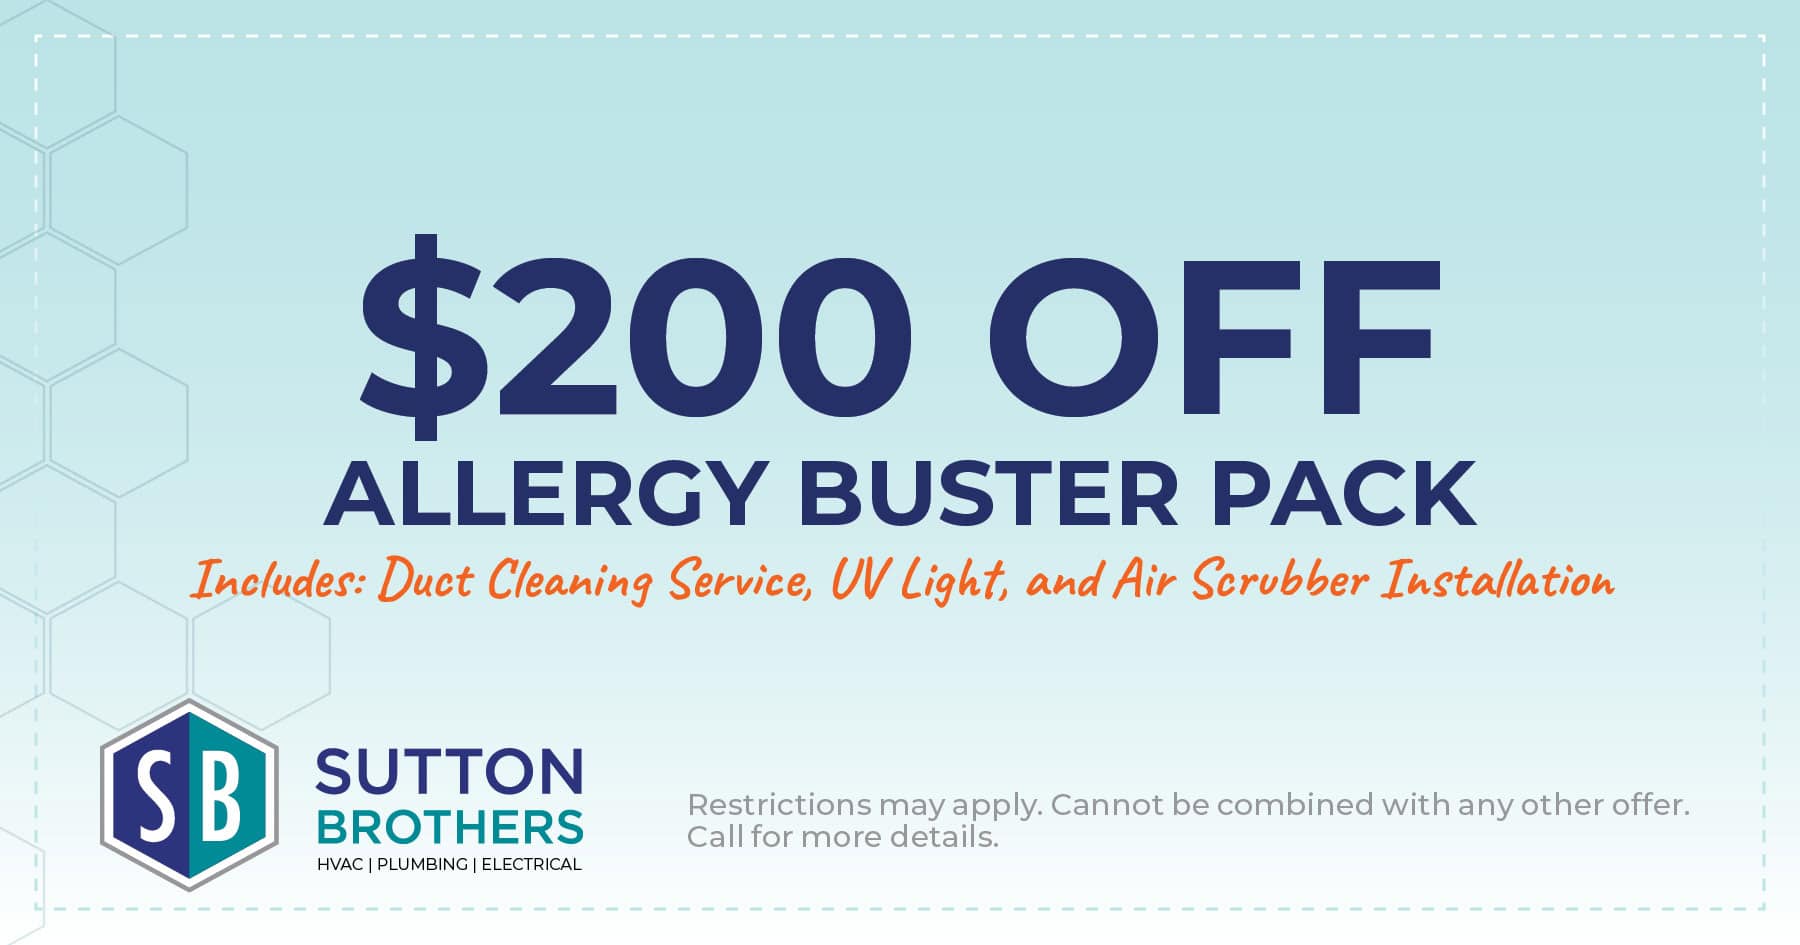 0 off allergy buster pack. Includes: duct cleaning service, UV light, and air scrubber installation.